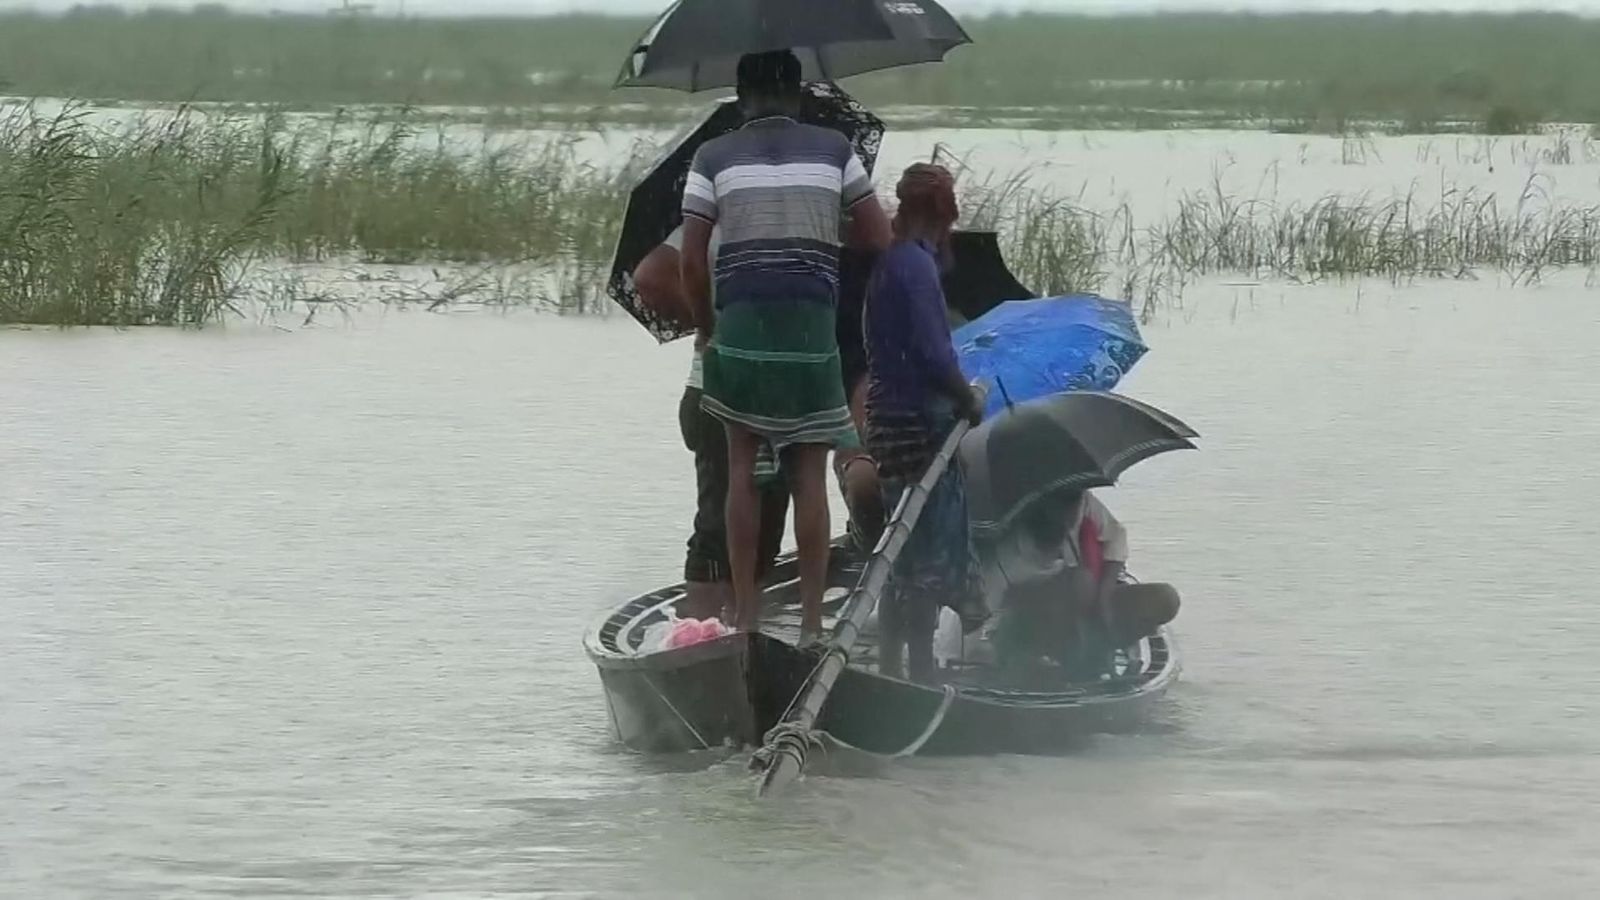 People use a canoe to escape floodwaters in Bangladesh